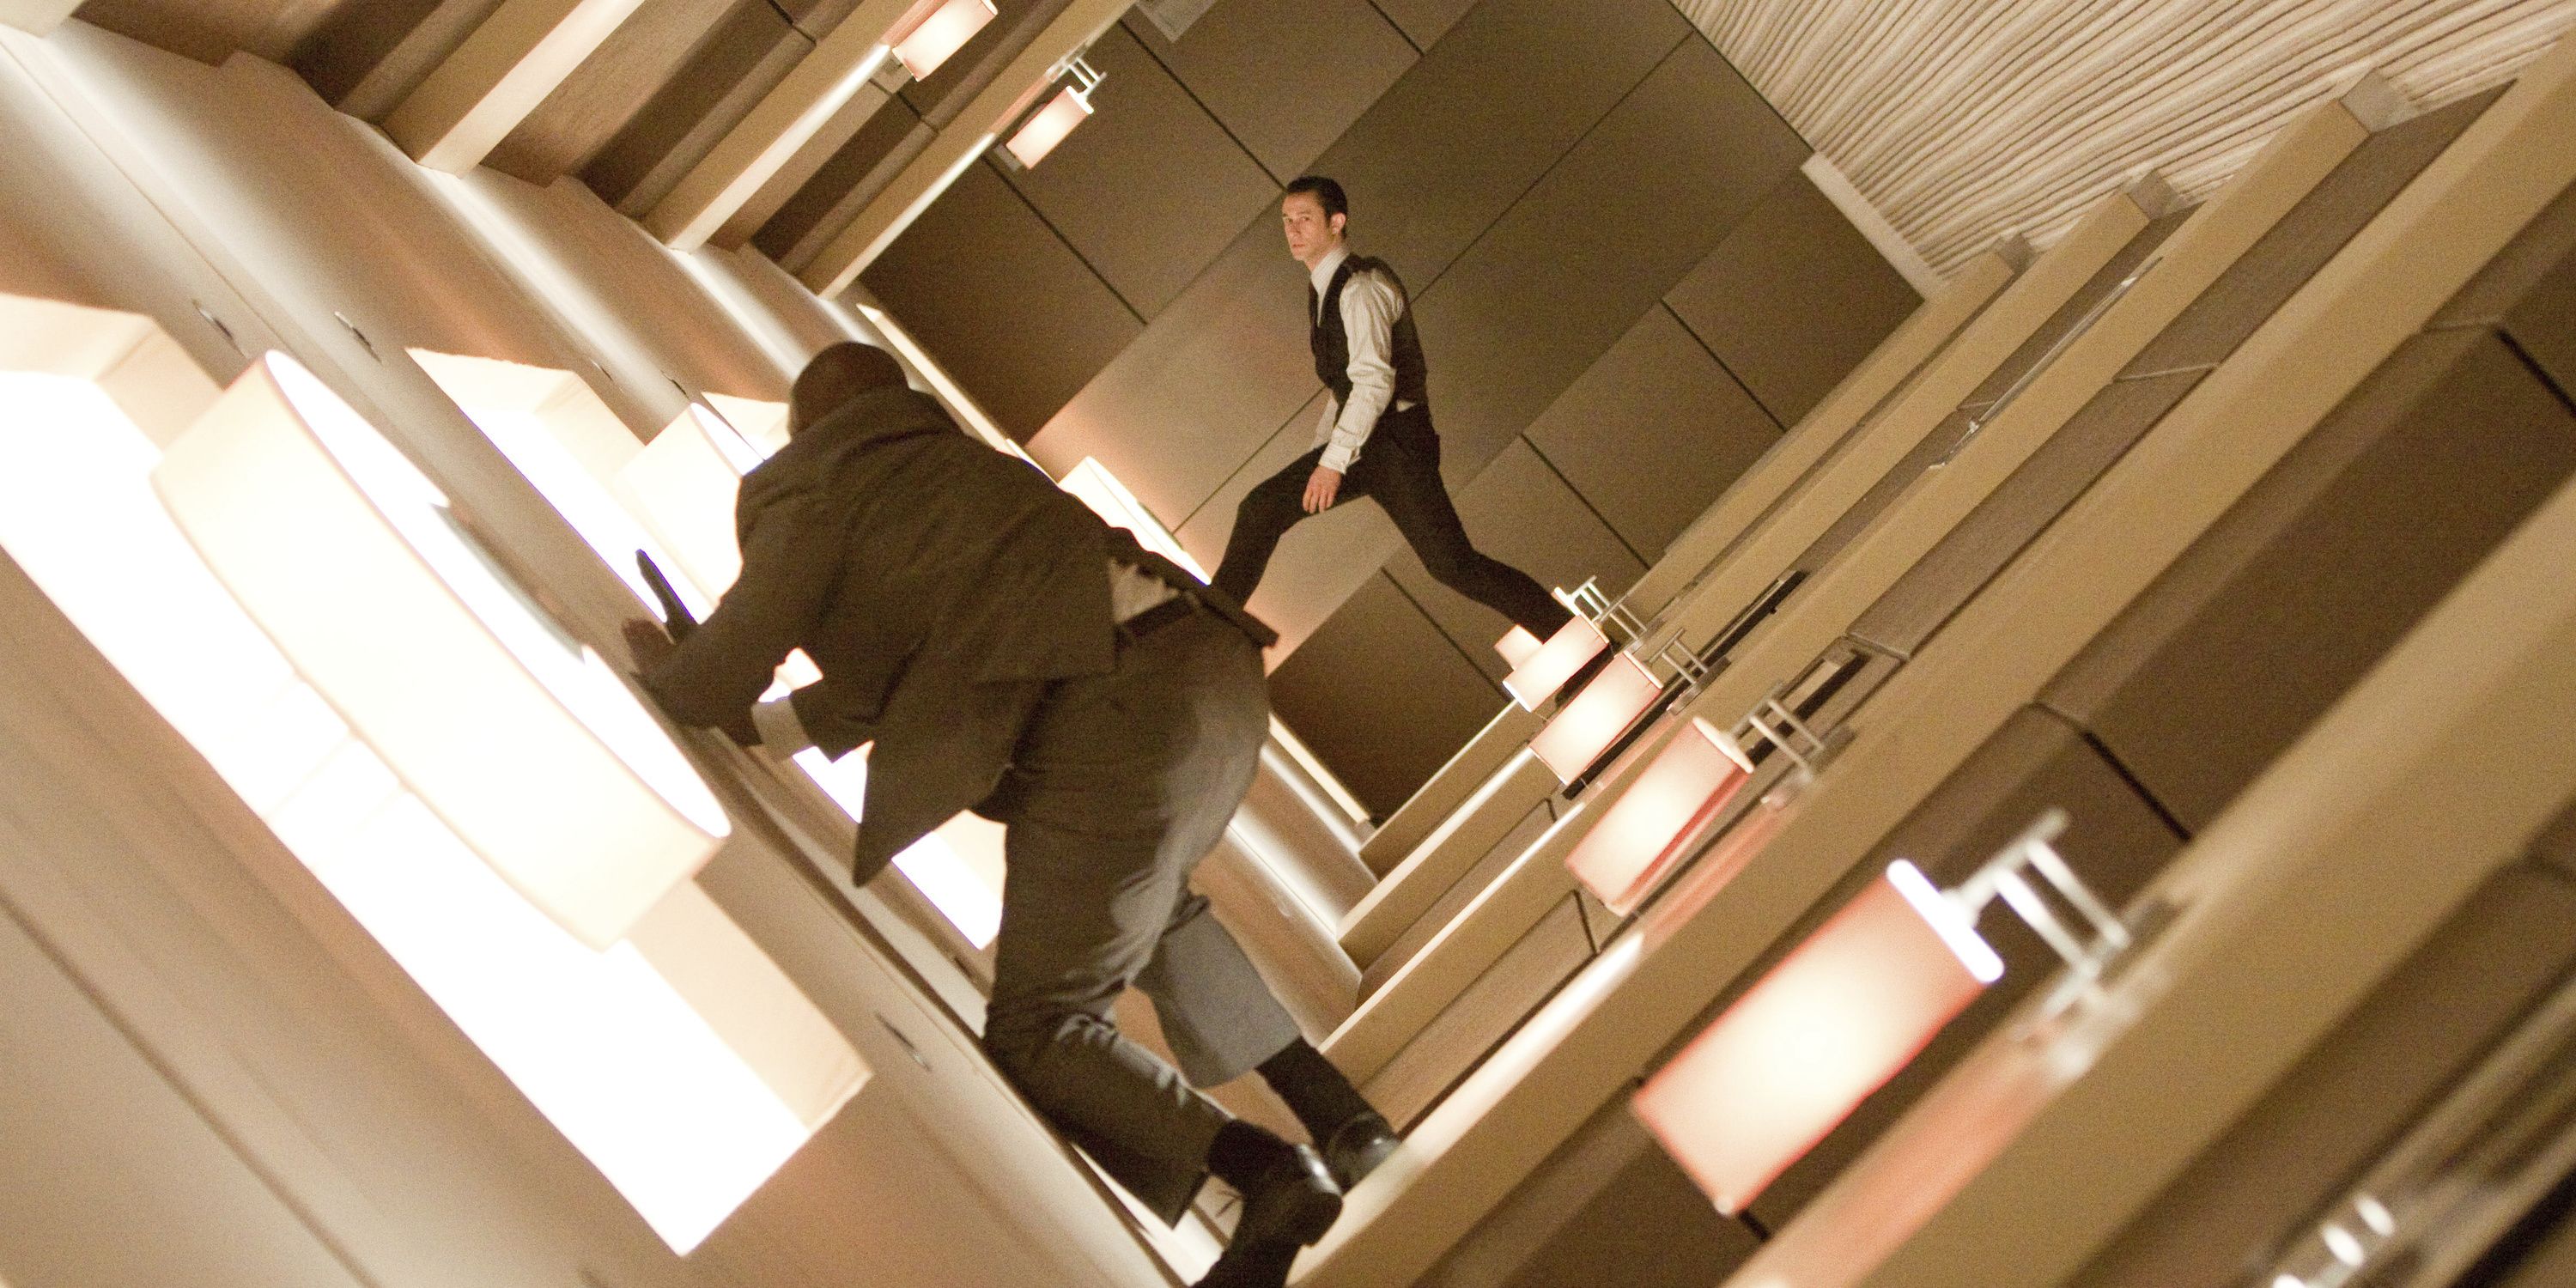 Rotating hallway from Inception